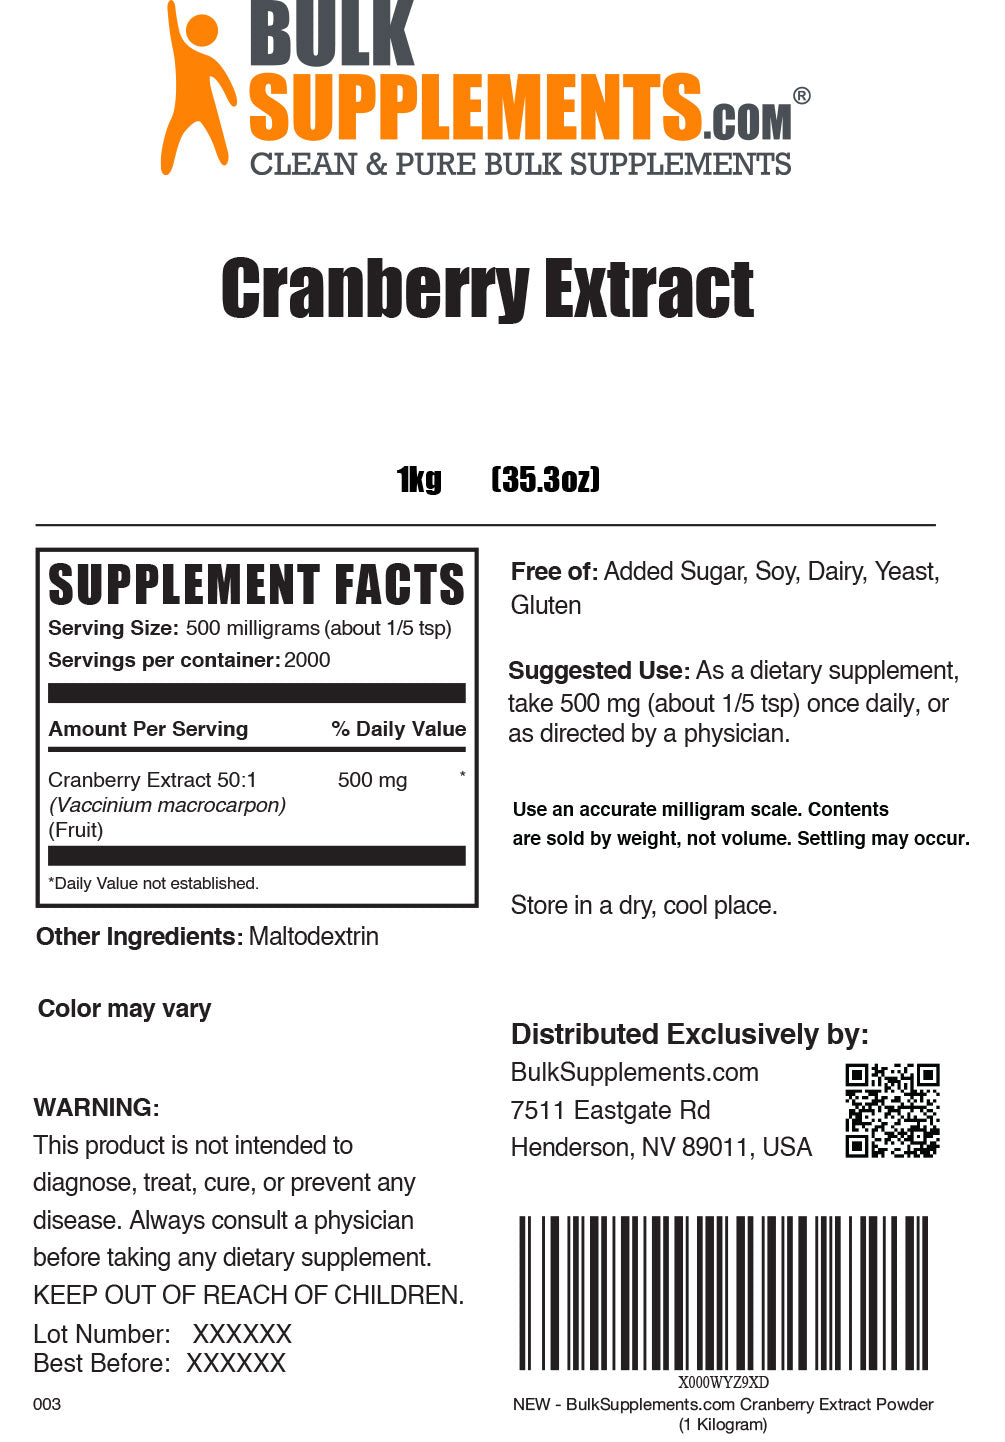 1kg Cranberry Extract Supplement Facts